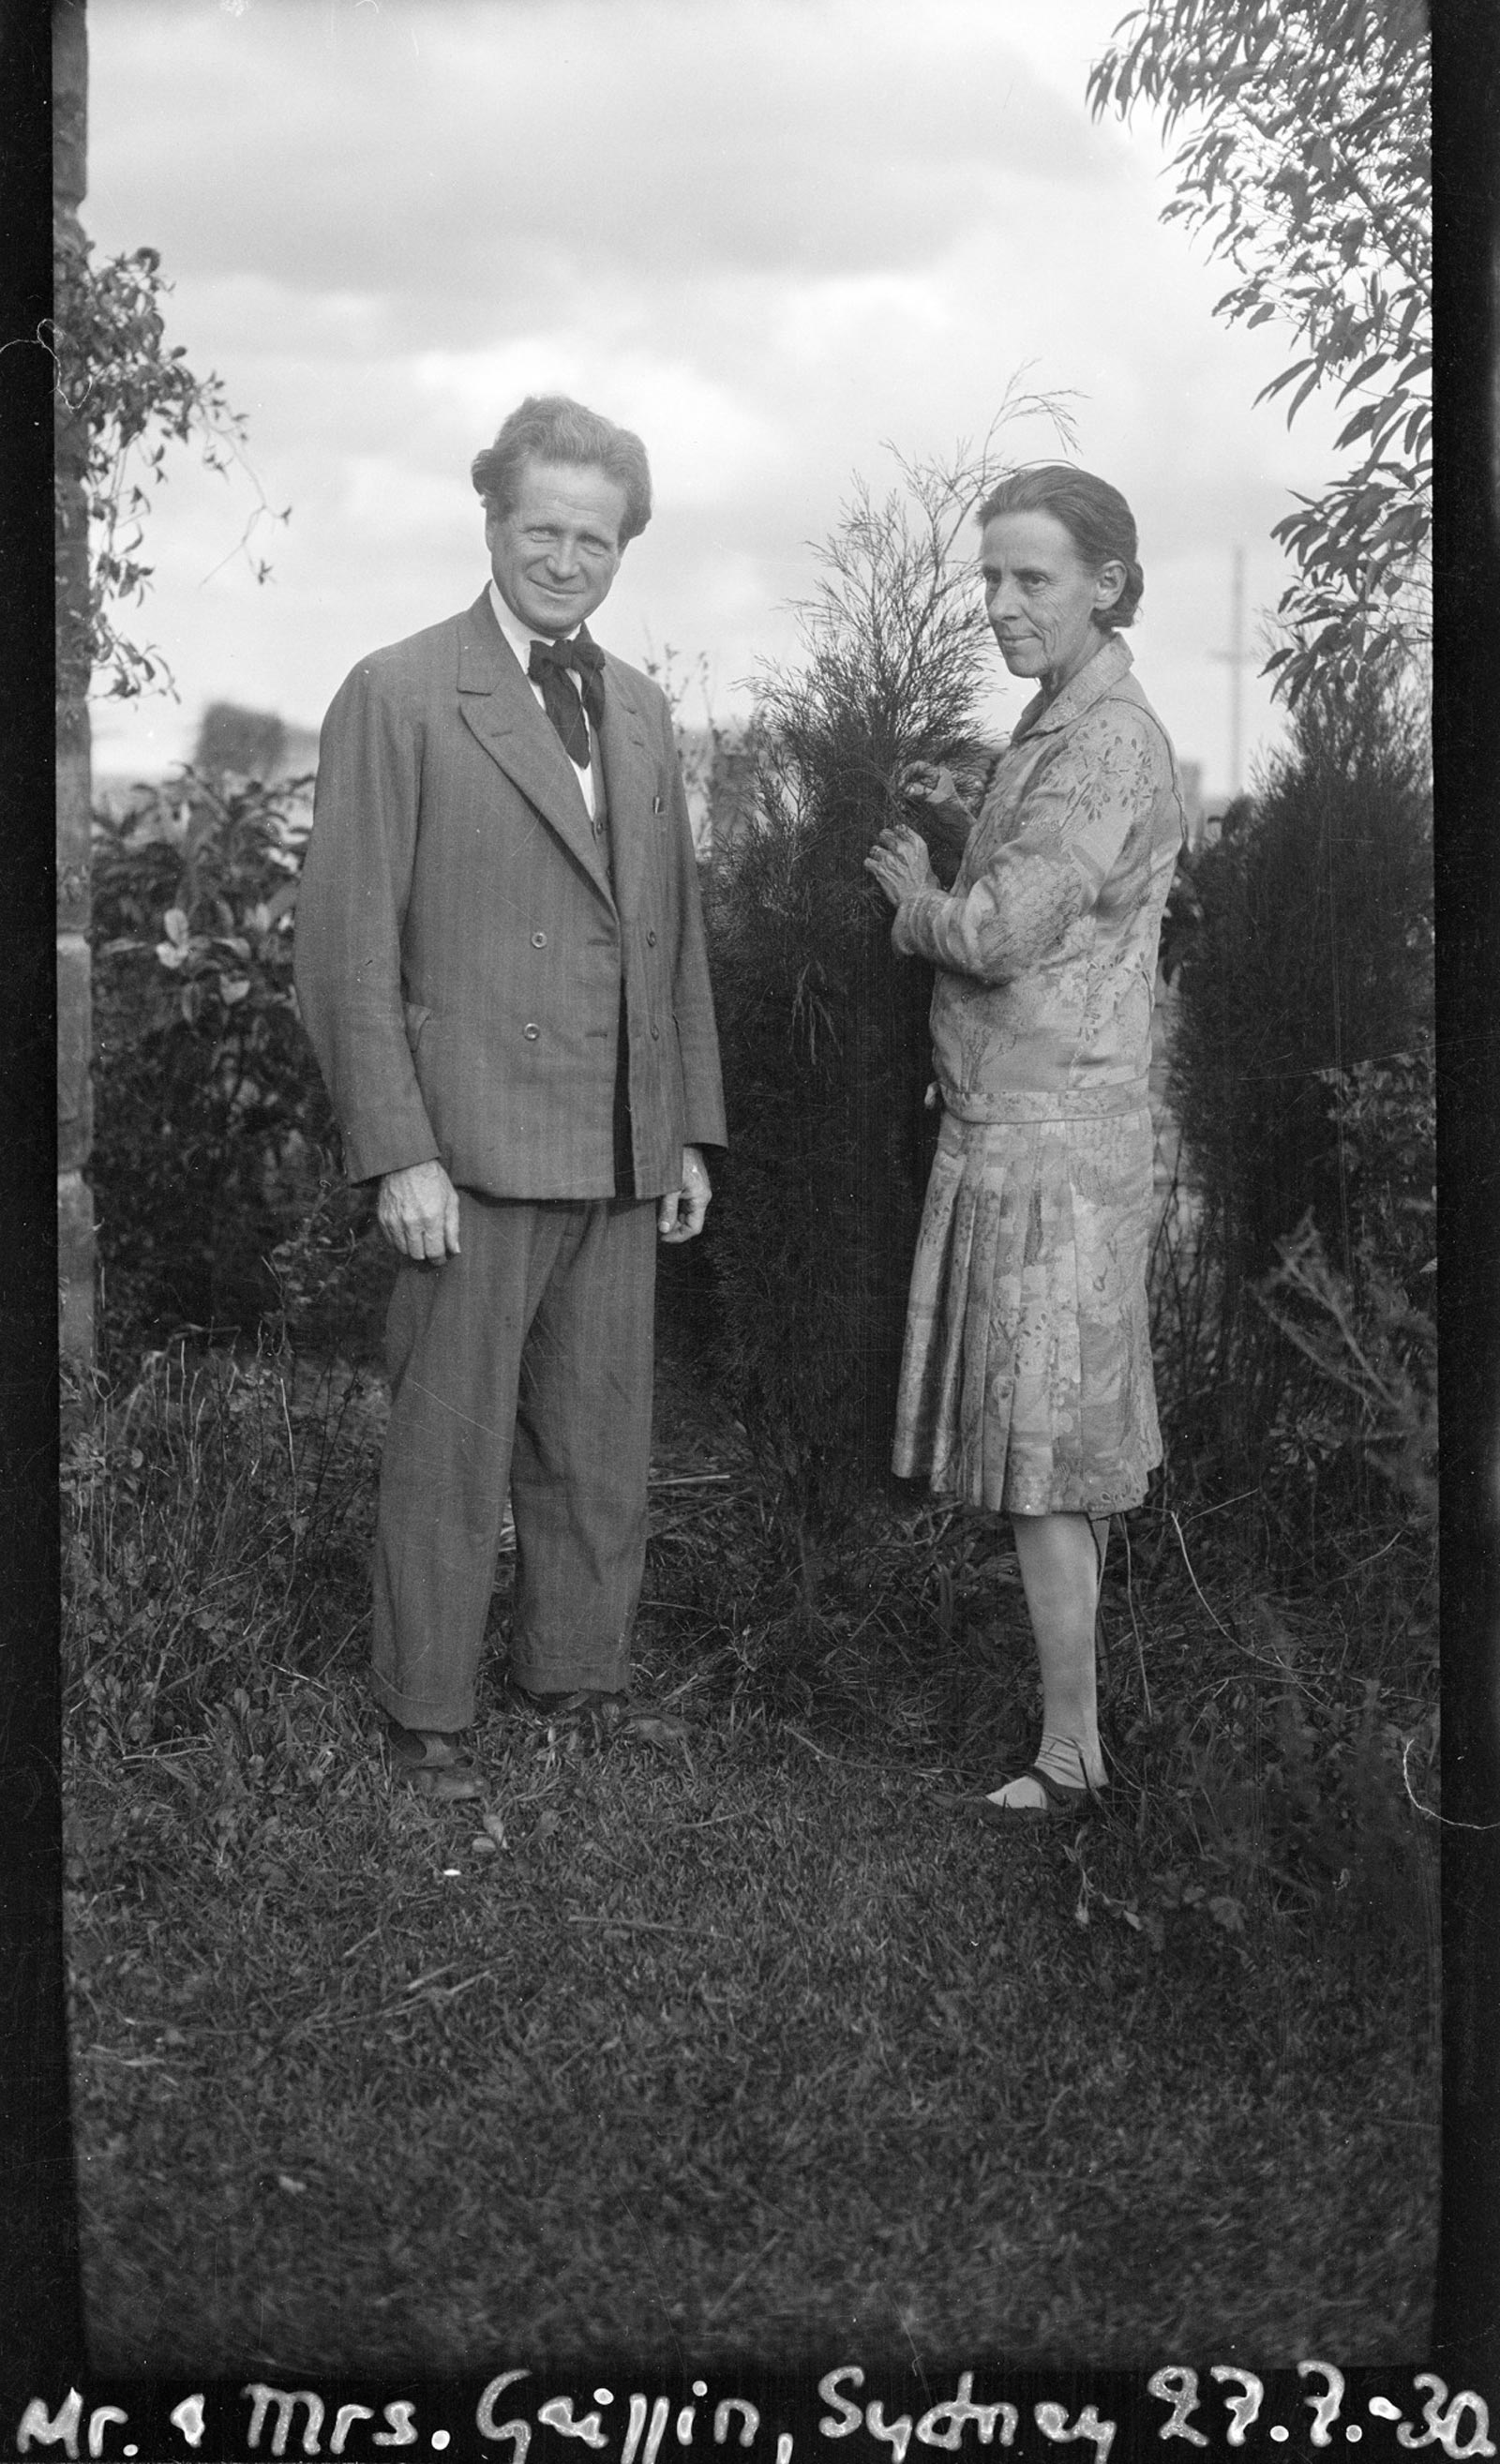 Walter Burley Griffin and Marion Mahony, designers of Canberra, 1930